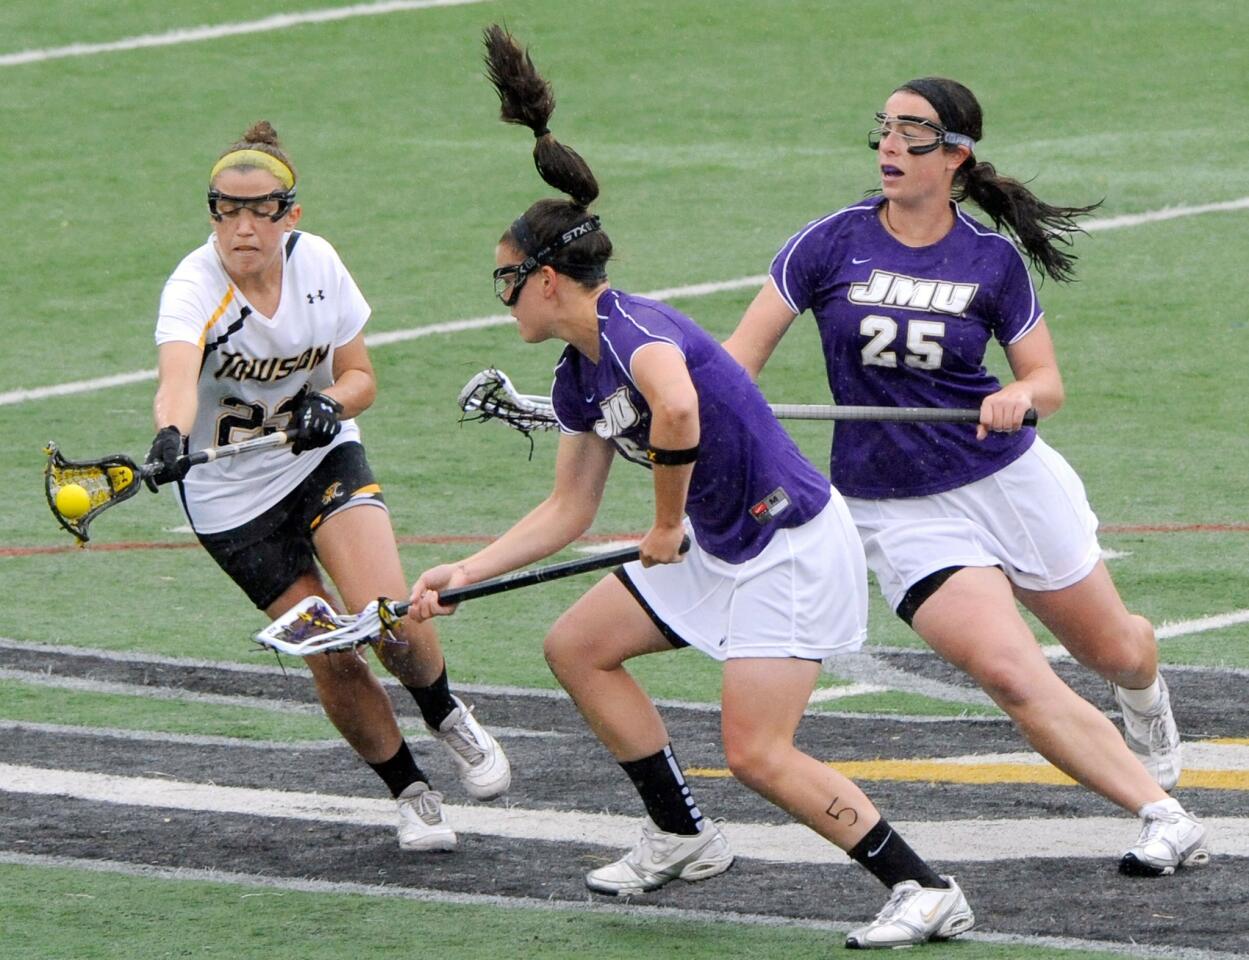 Towson's Sarah Hogan, left, battles James Madison's Caitlin McHugh, center, and Monica Zabel for a loose ball in the first half.